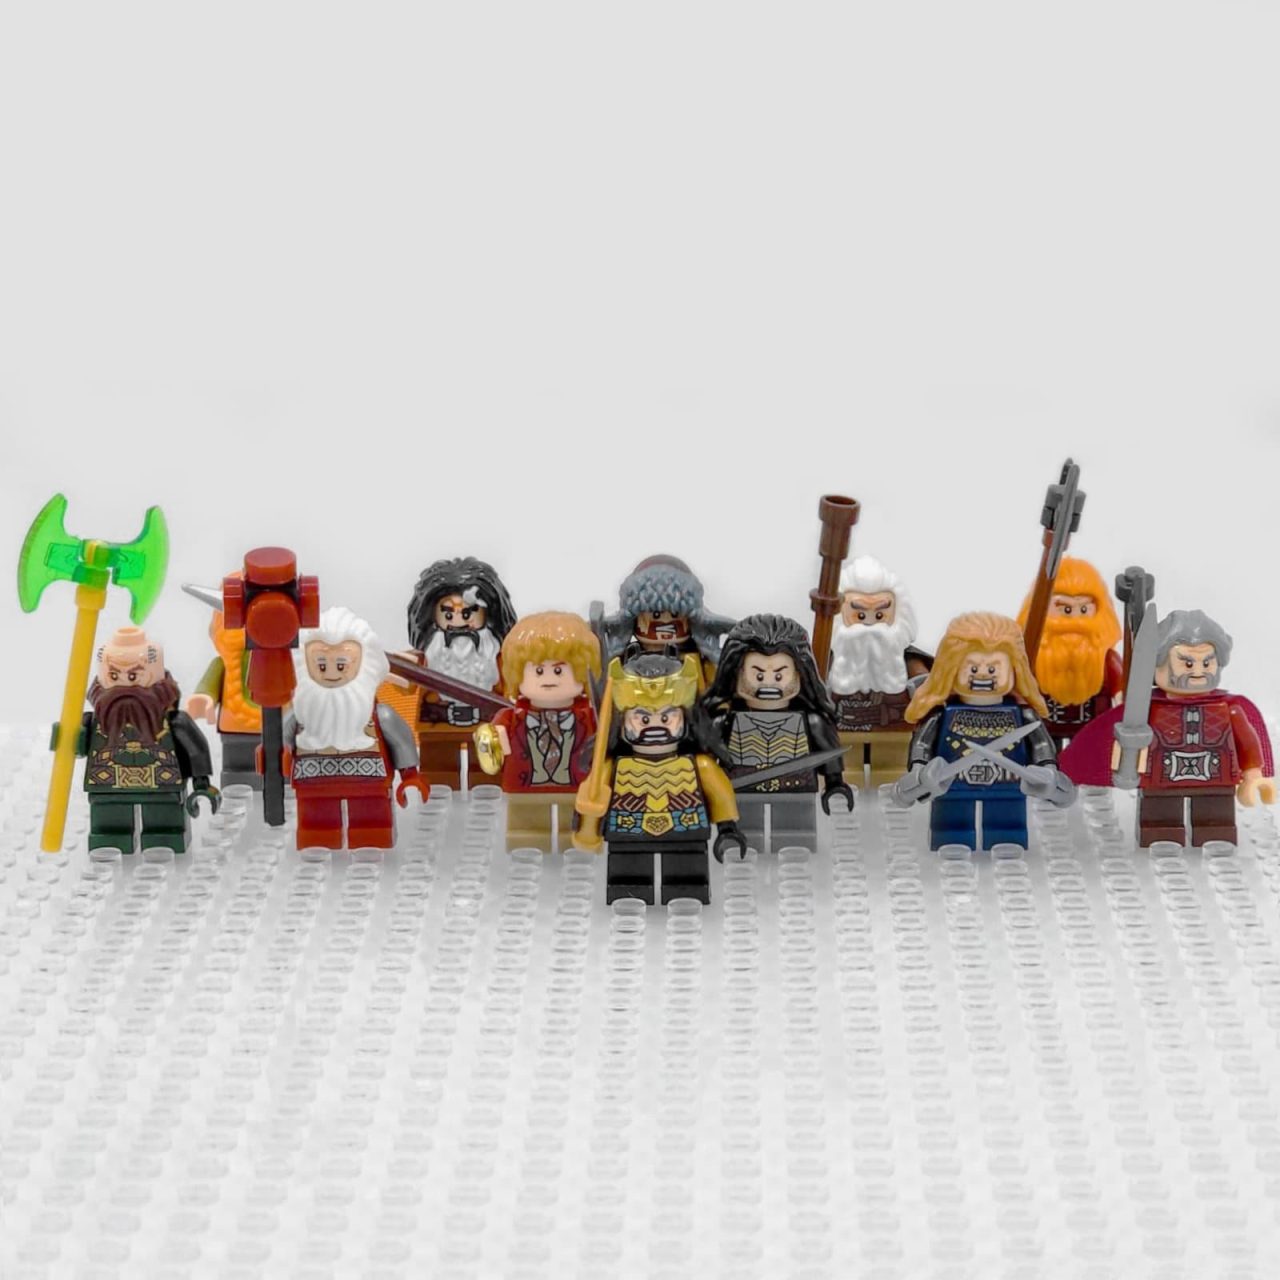 Lord of the Rings Thorins